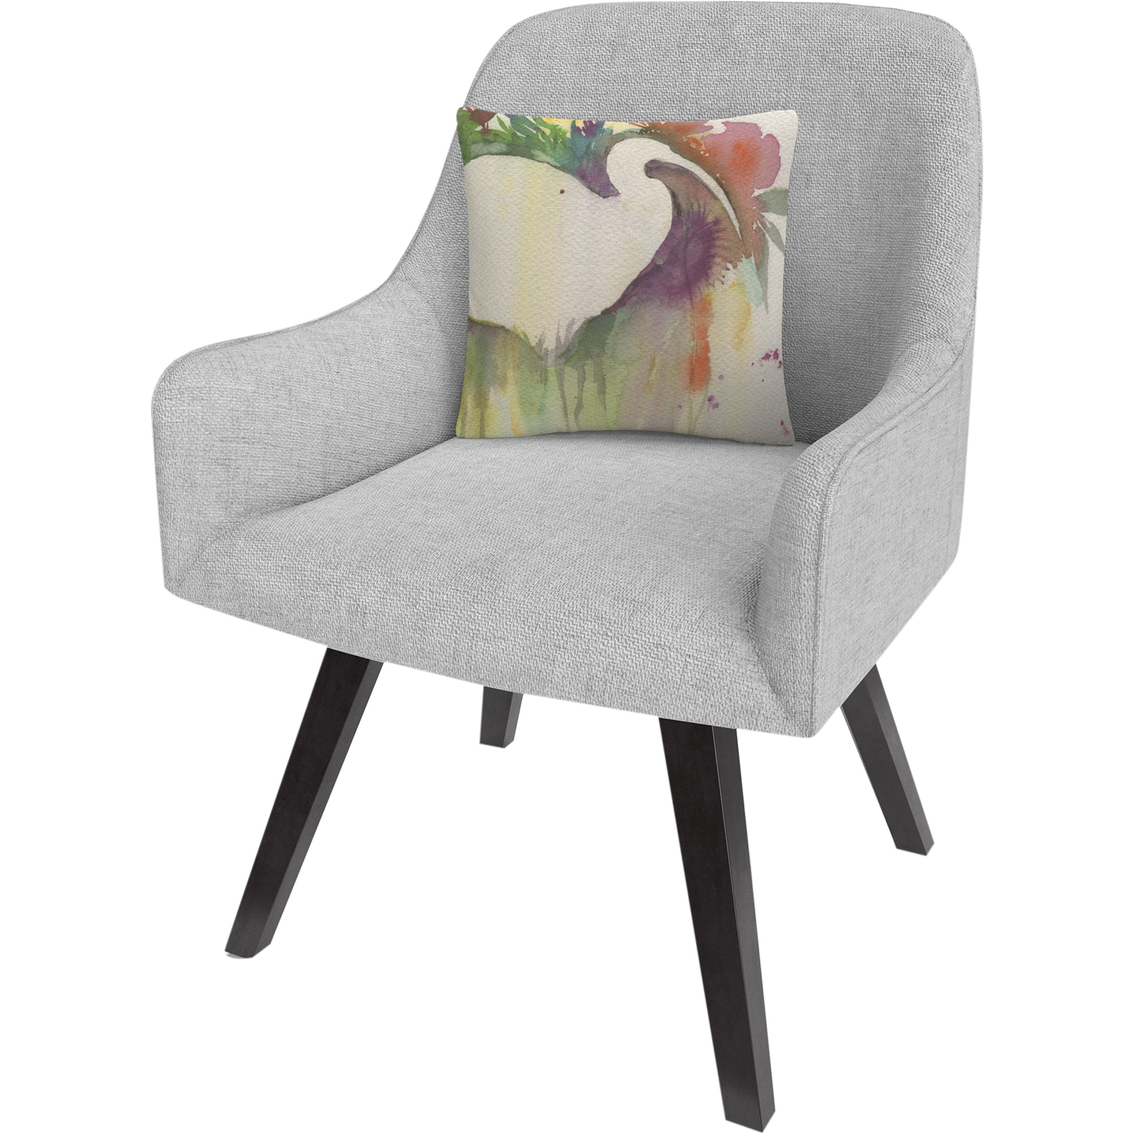 Trademark Fine Art Ibis Dream Abstract Color Decorative Throw Pillow - Image 2 of 2